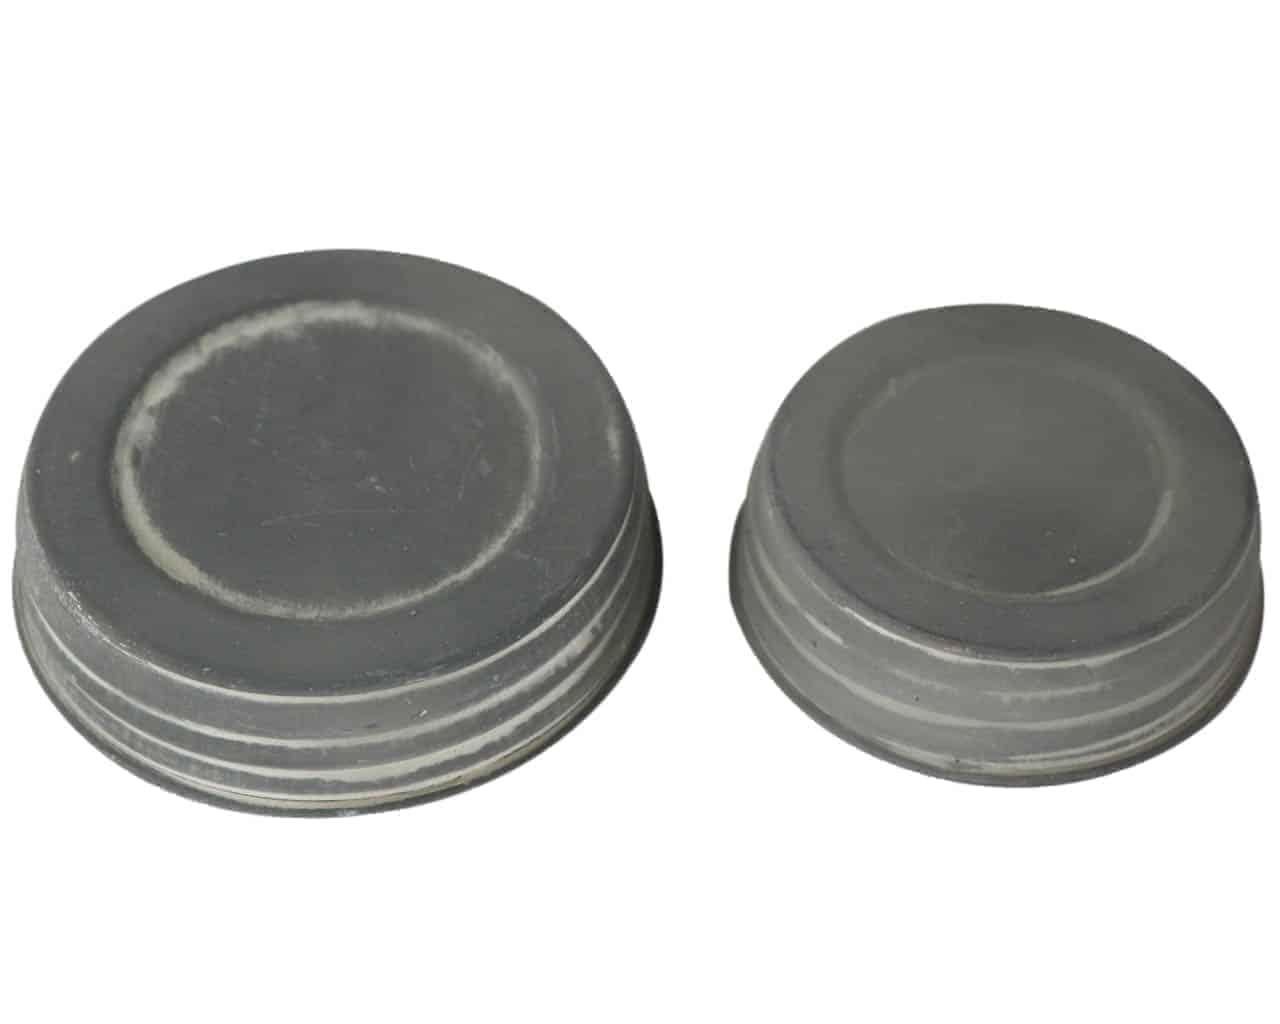 Classic Stainless Drinking Jar Lid - Regular Mouth